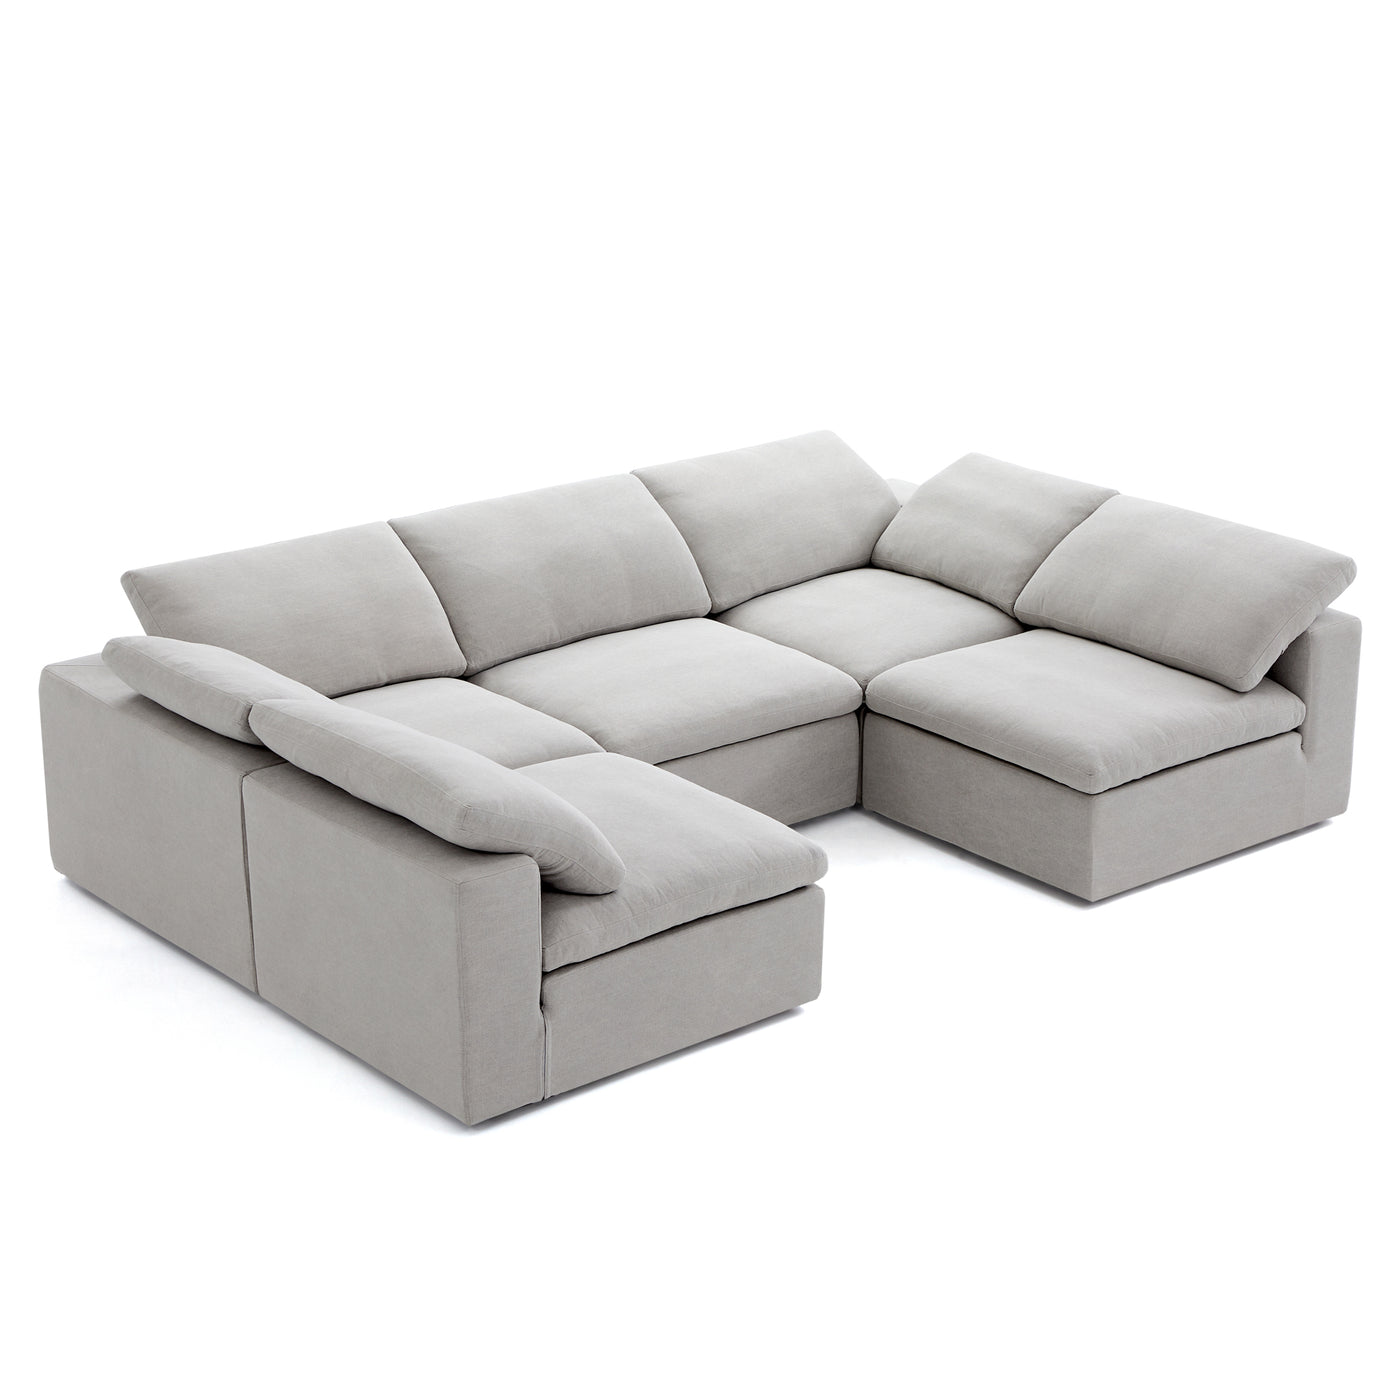 Tender Wabi Sabi Sand U Shaped Sectional with Open Ends-Gray-128.0"